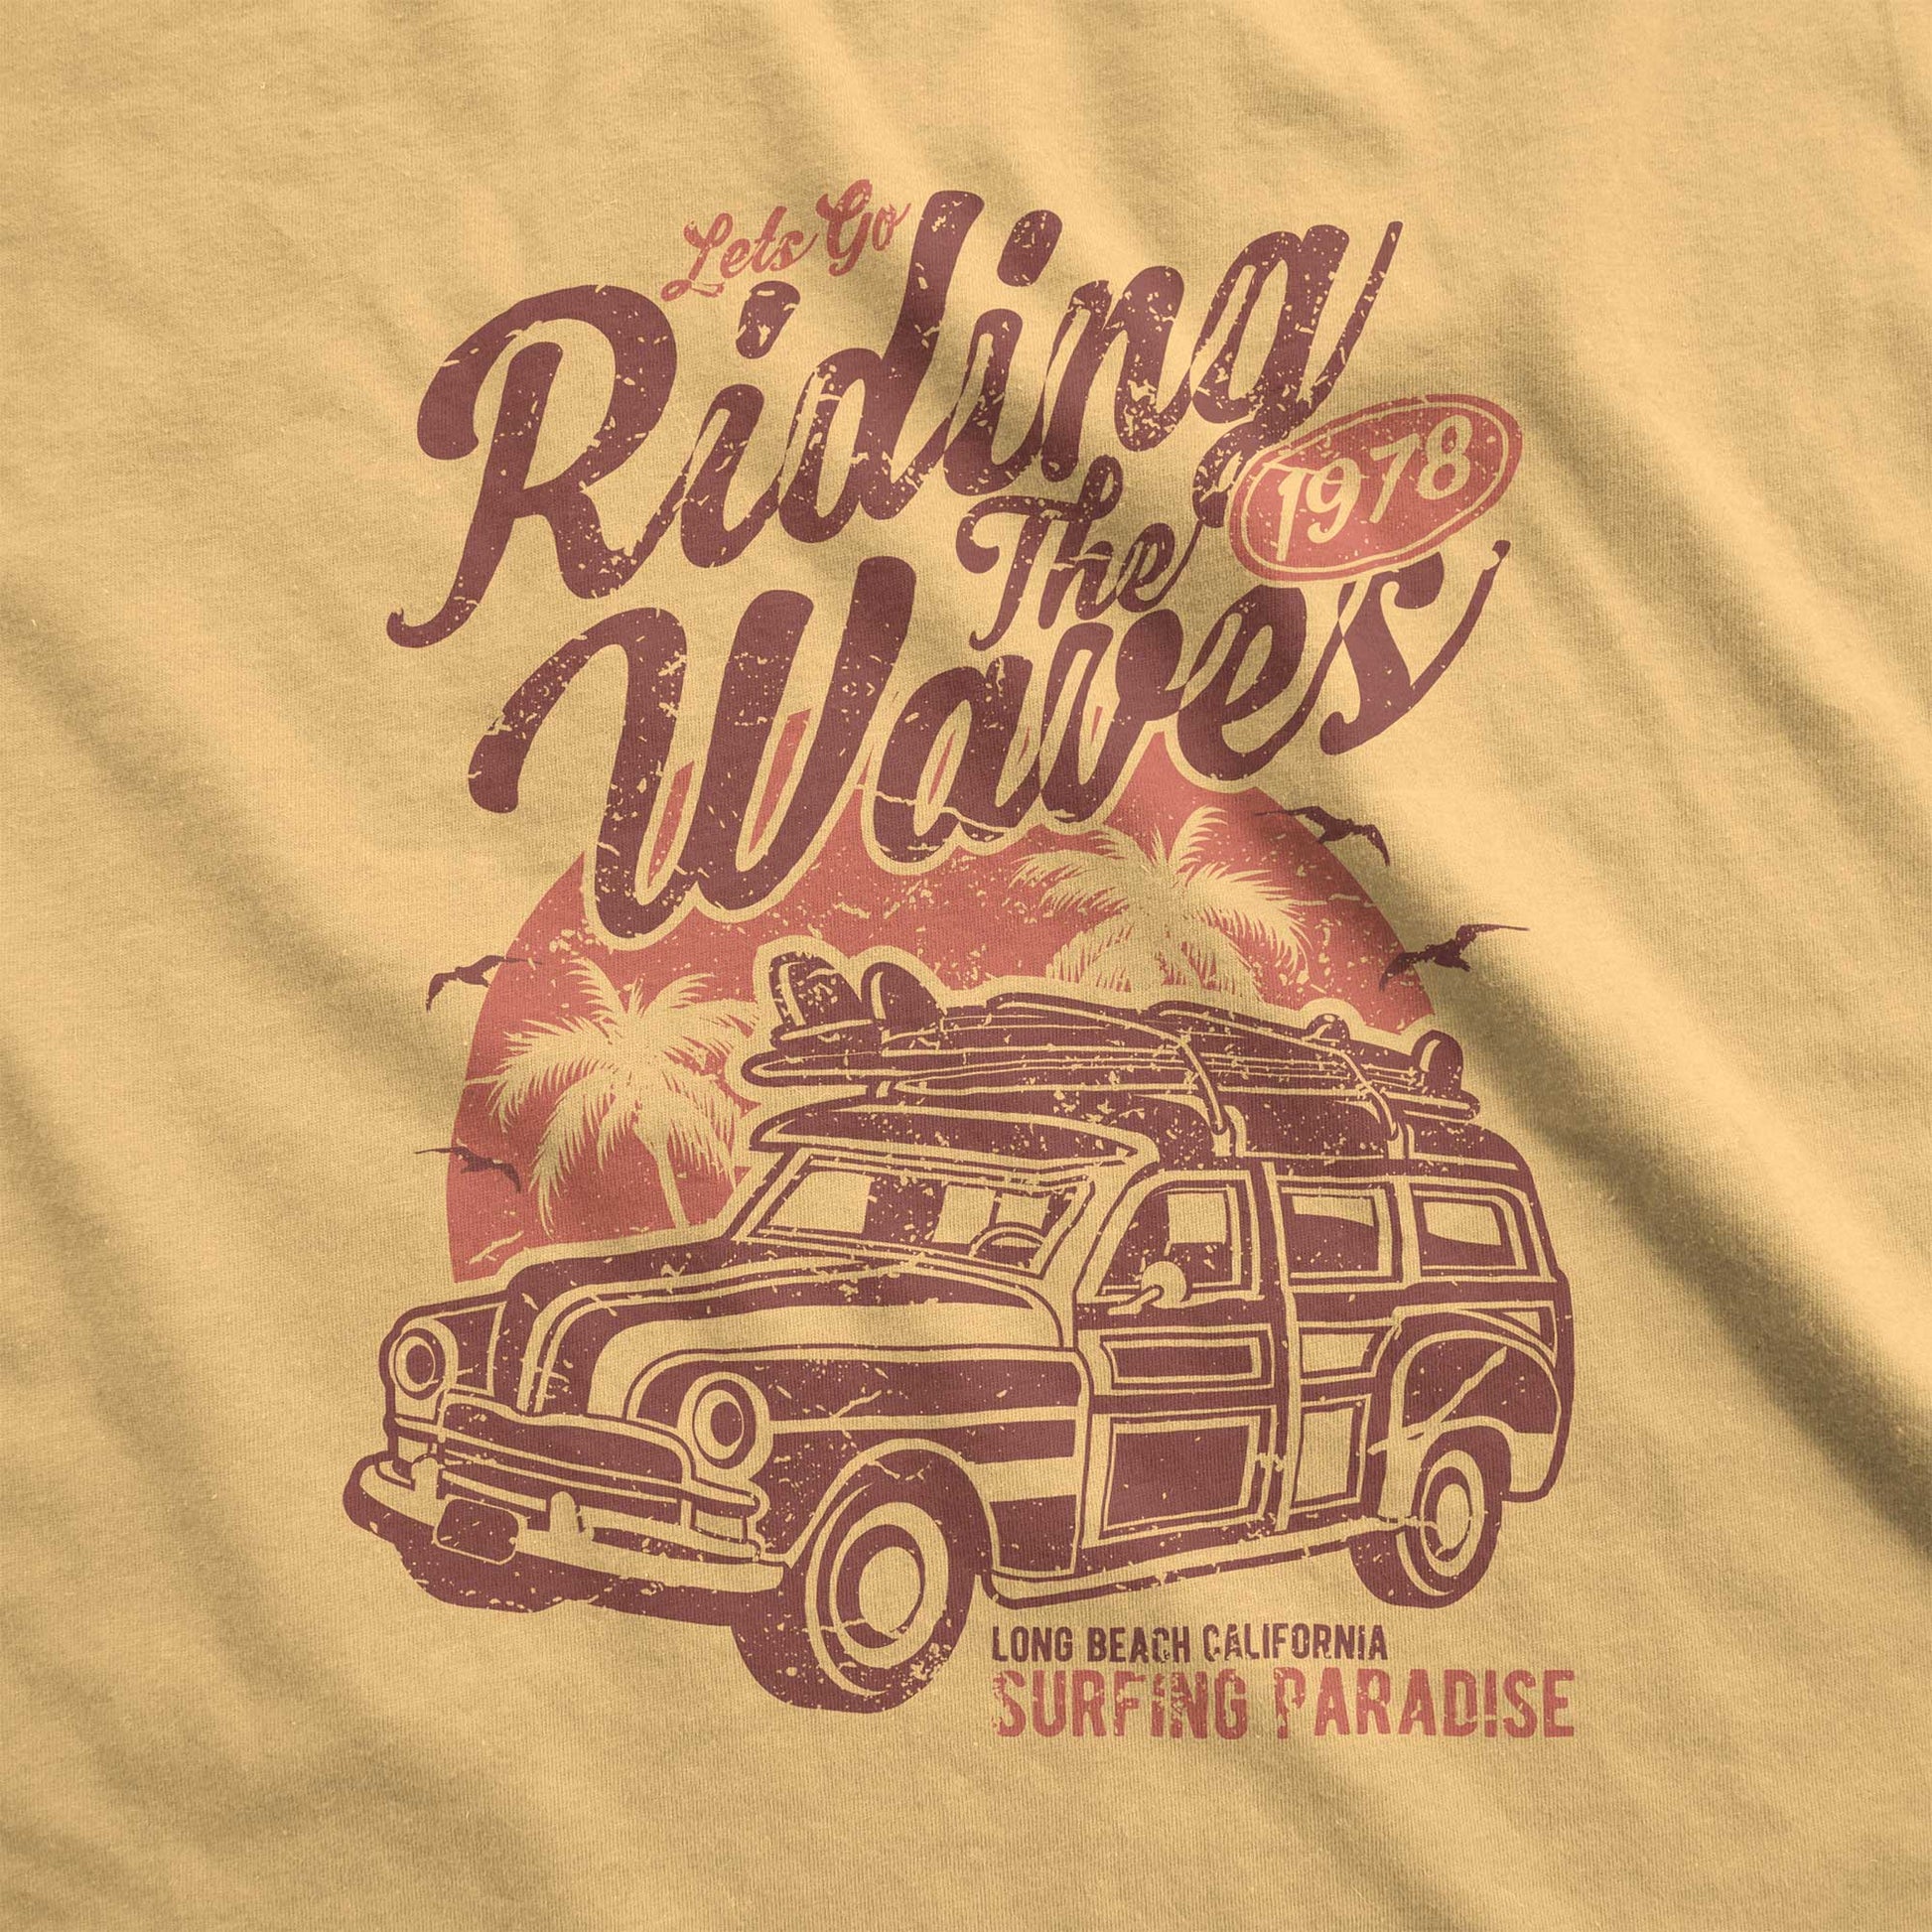 A mustard yellow Comfort Colors swatch featuring a woodie station wagon, a surfboard, palm tress and the words let's go riding the waves